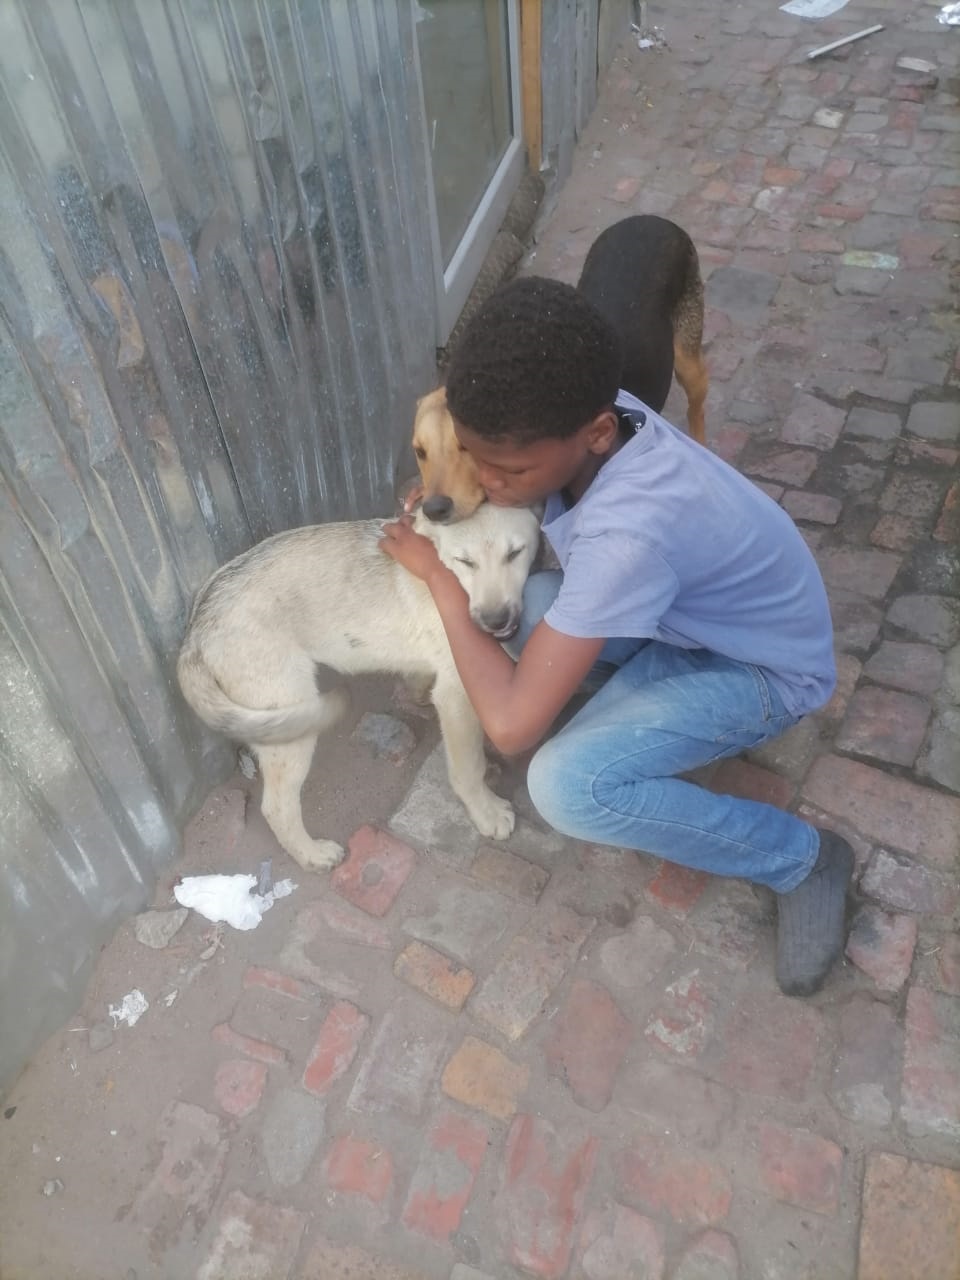 Cape Town teen dedicates his time to help sick stray dogs | News24